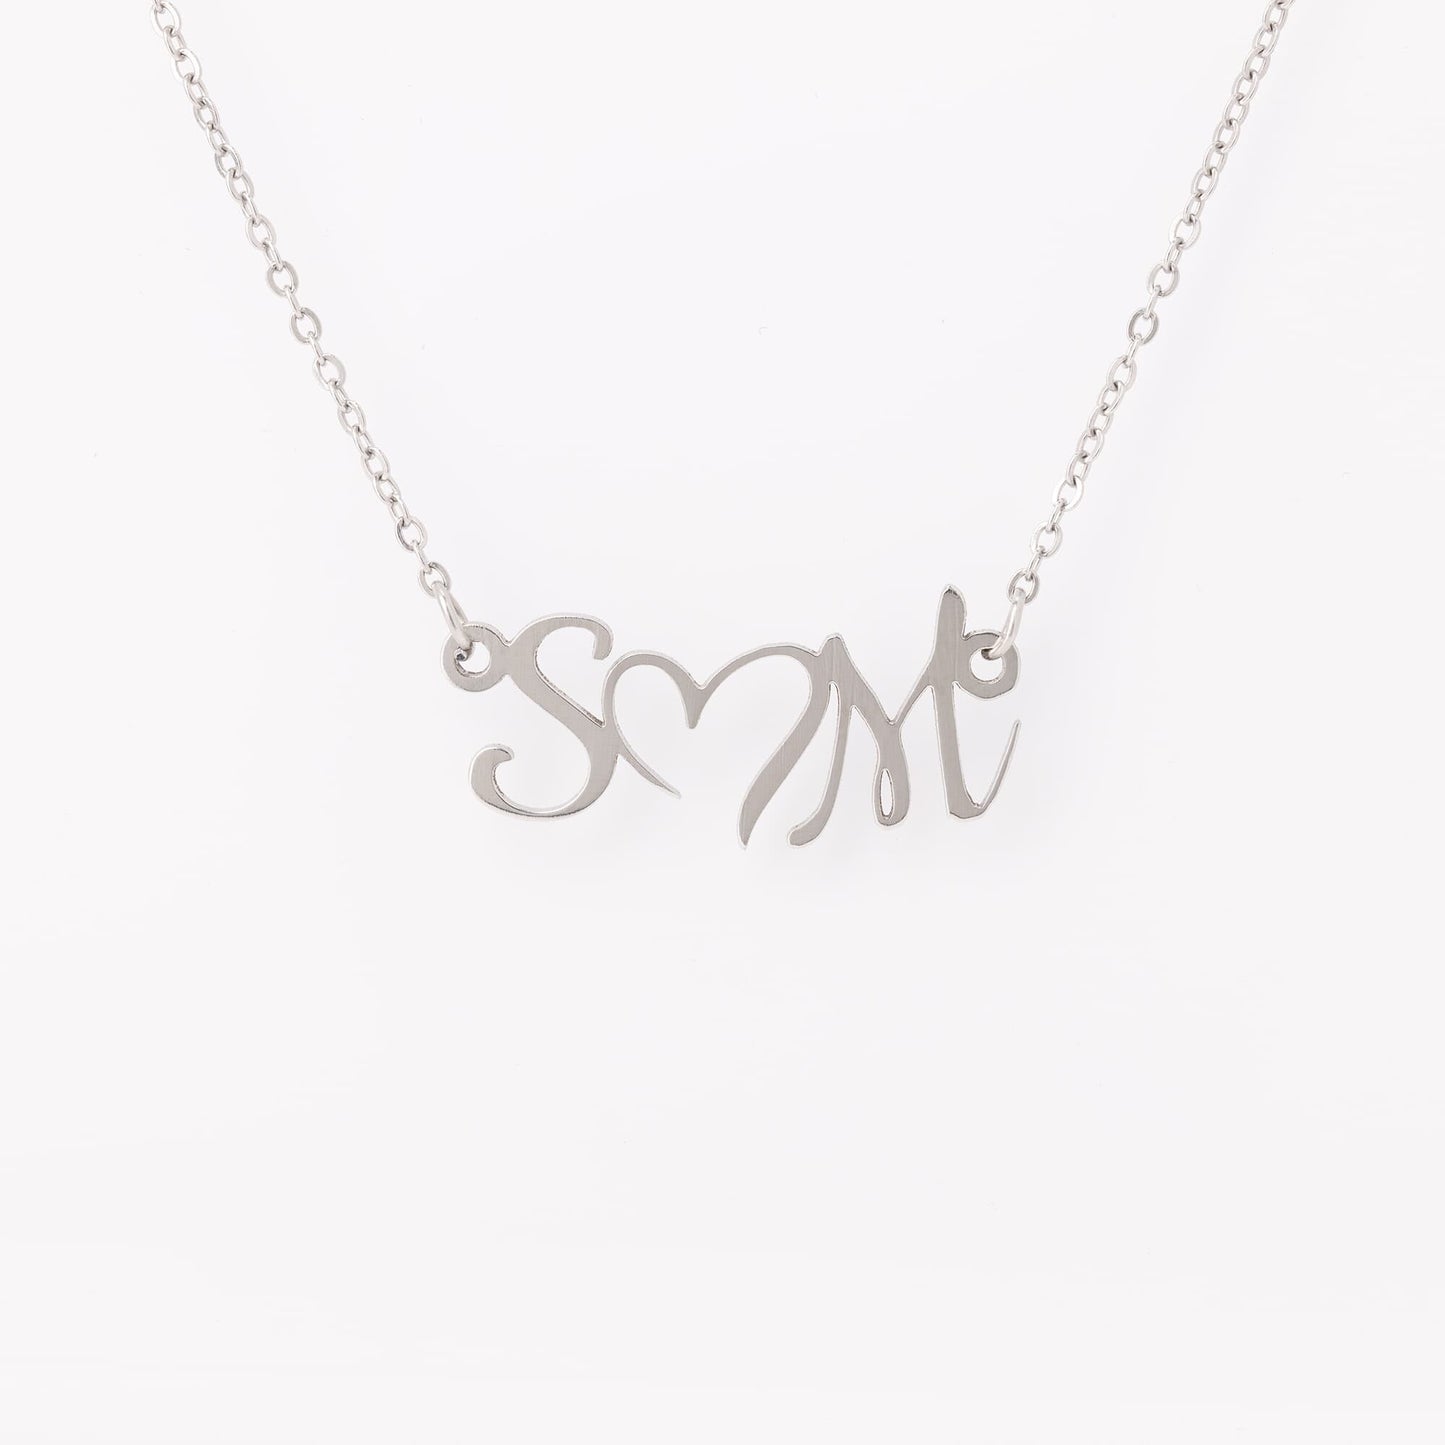 Personalized Name necklace